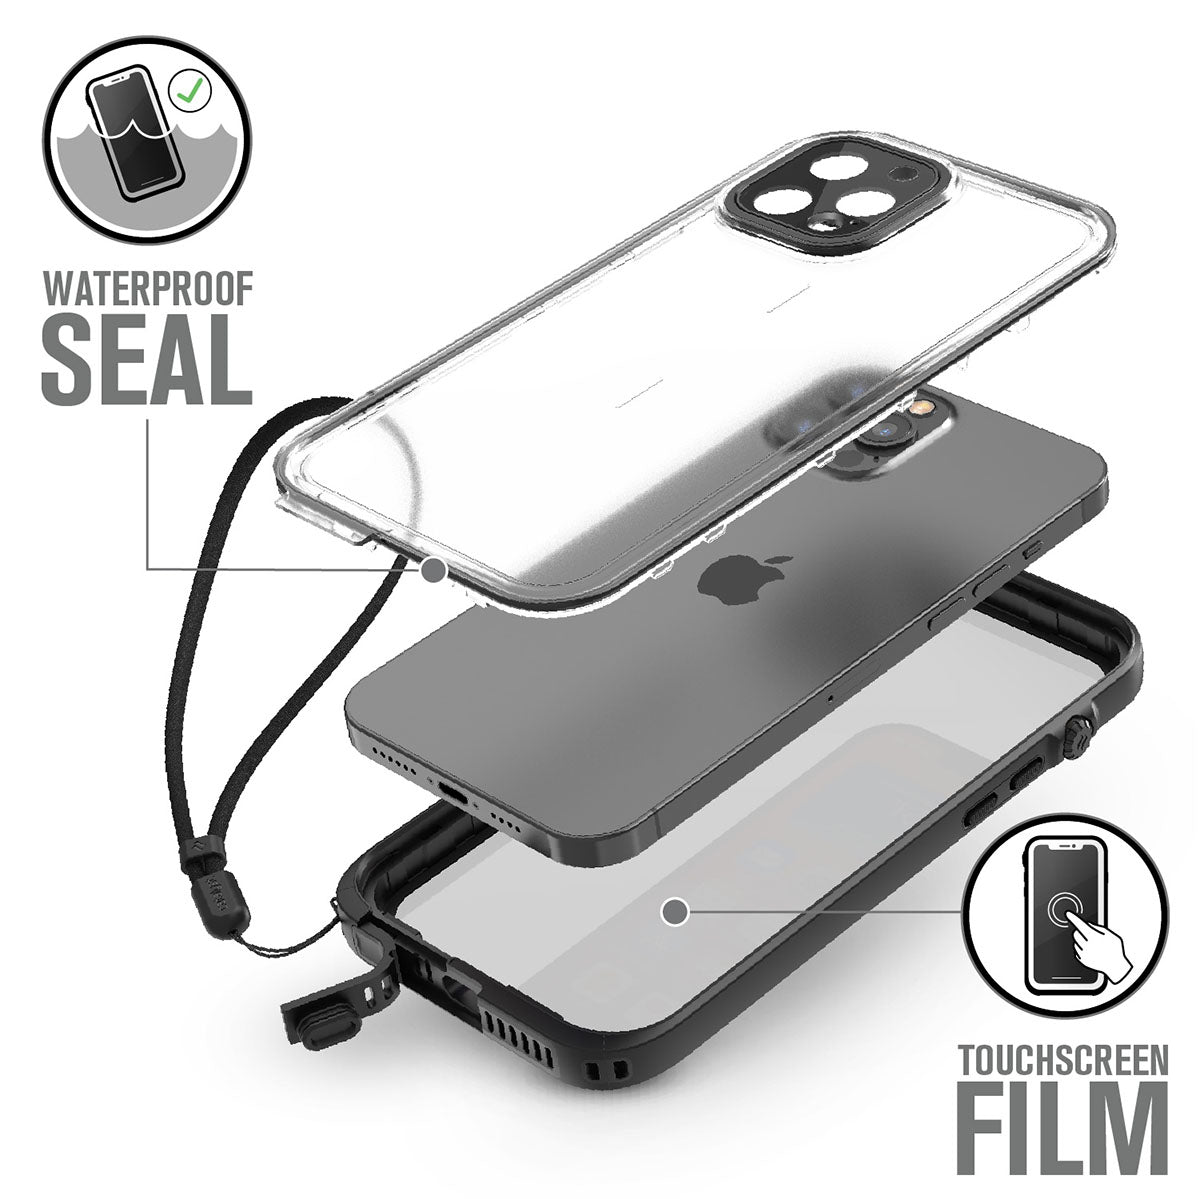 Catalyst iPhone 12 waterproof case total protectionshowing parts of the case Text reads waterproof seal touchscreen film